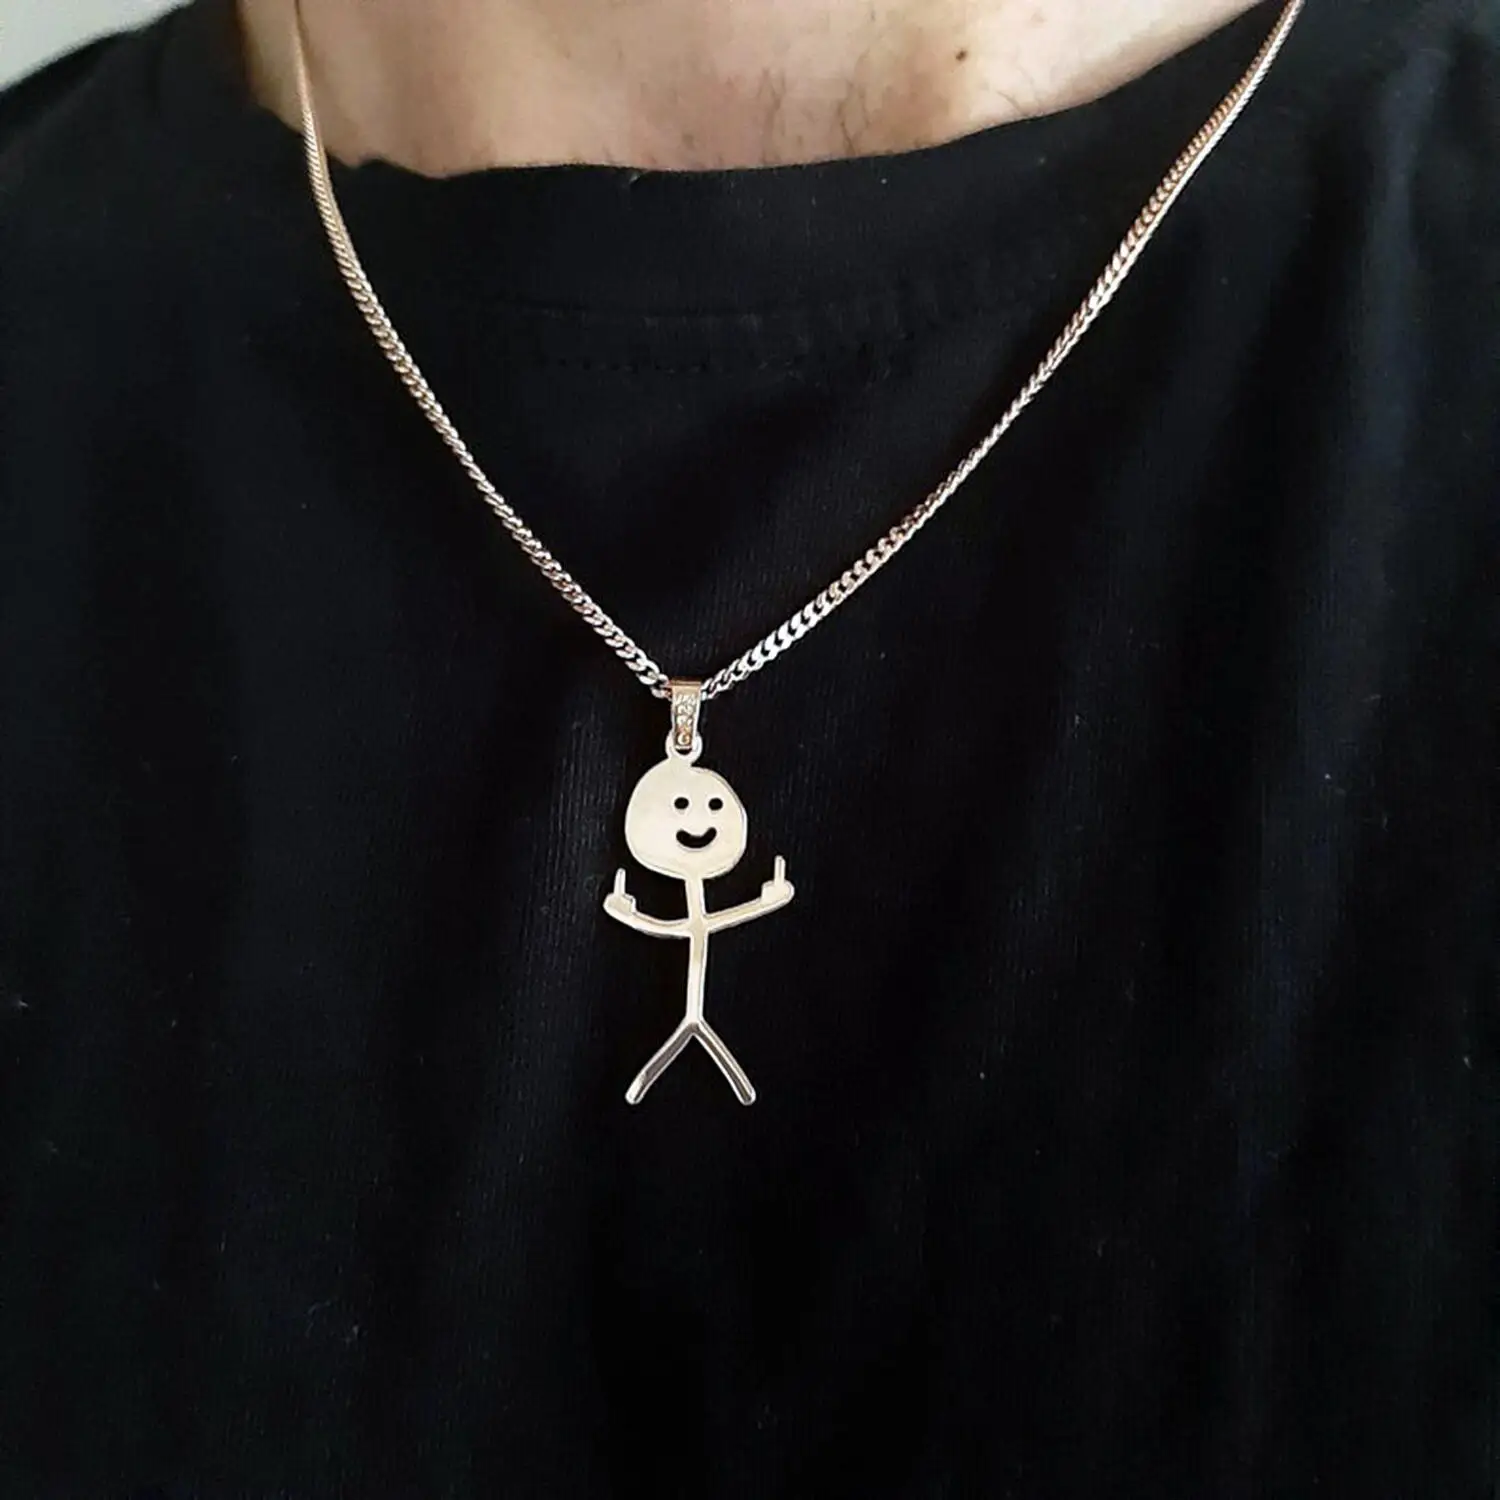 A person showcasing the Creative Doodle Pendant Necklace, a new women's fashion necklace featuring a stylish stick figure pendant.